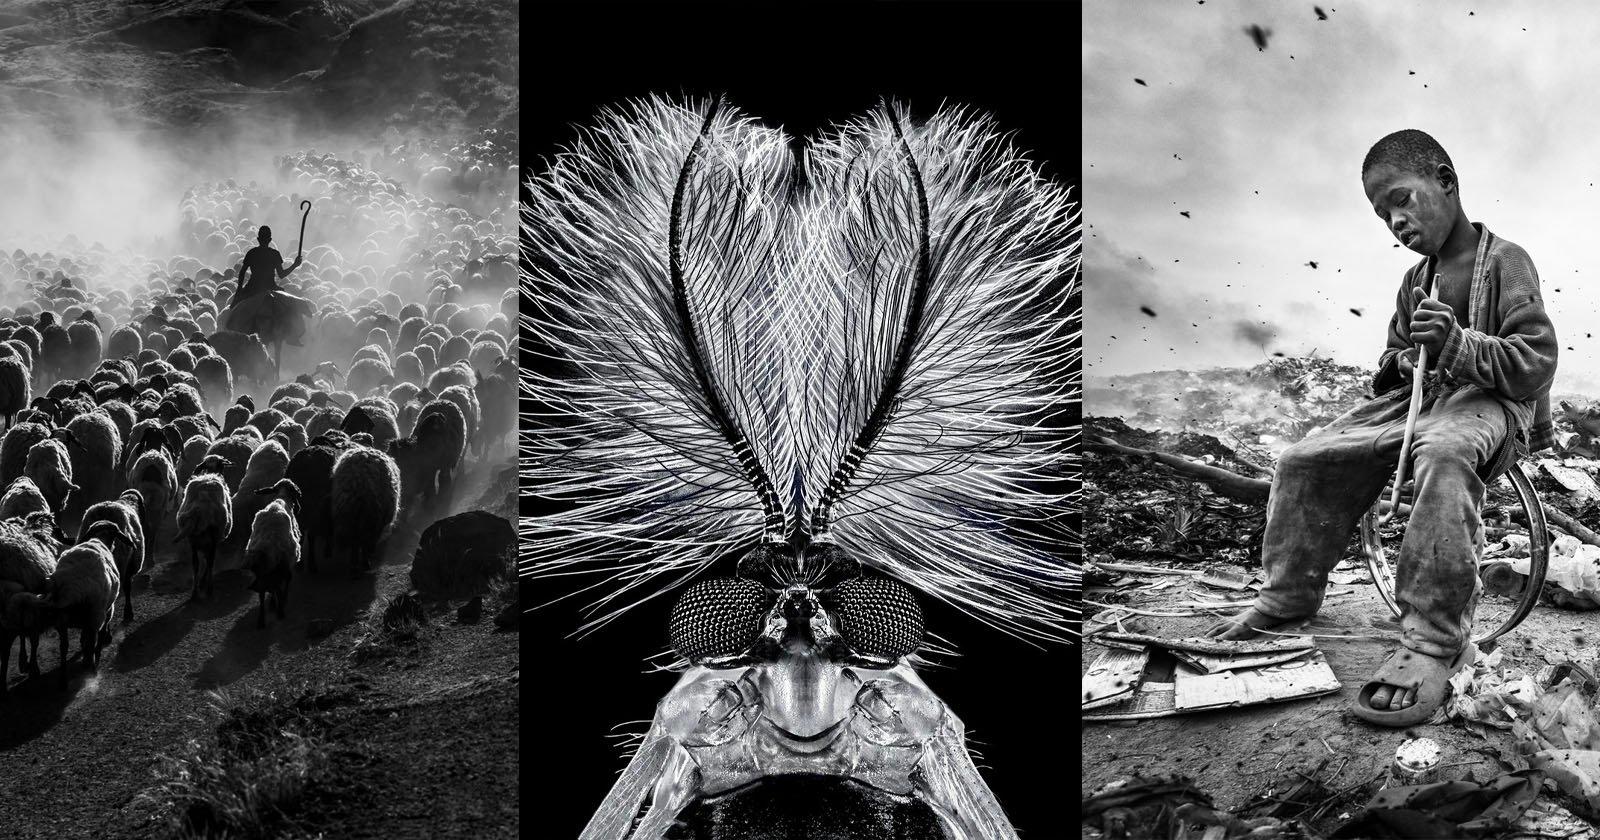 The Incredible Winning Images of a Black and White Photo Competition